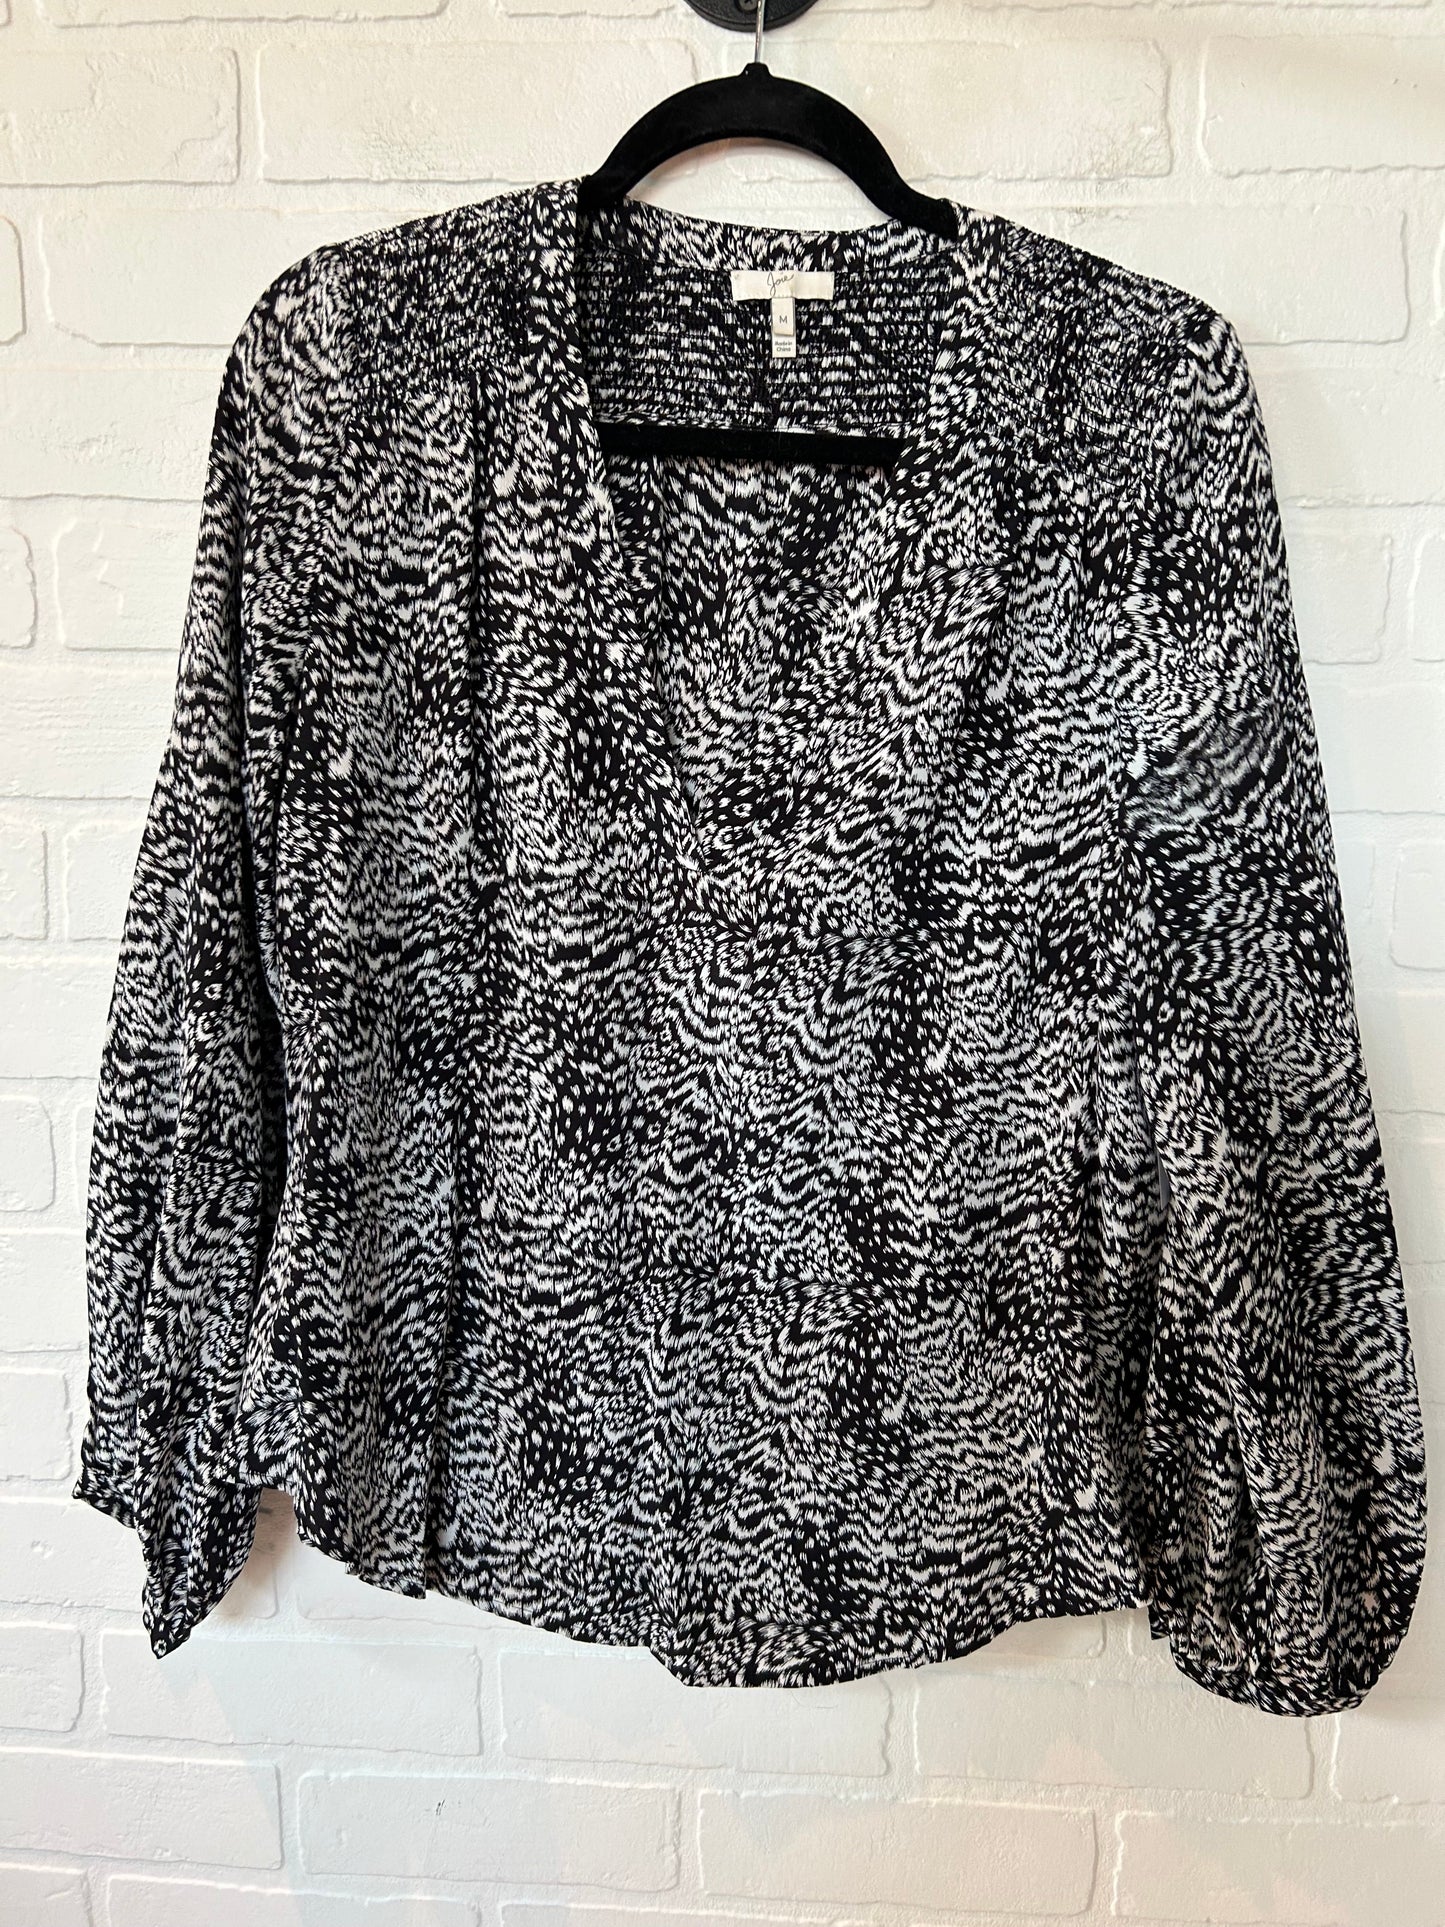 Black & White Top Long Sleeve Joie, Size M